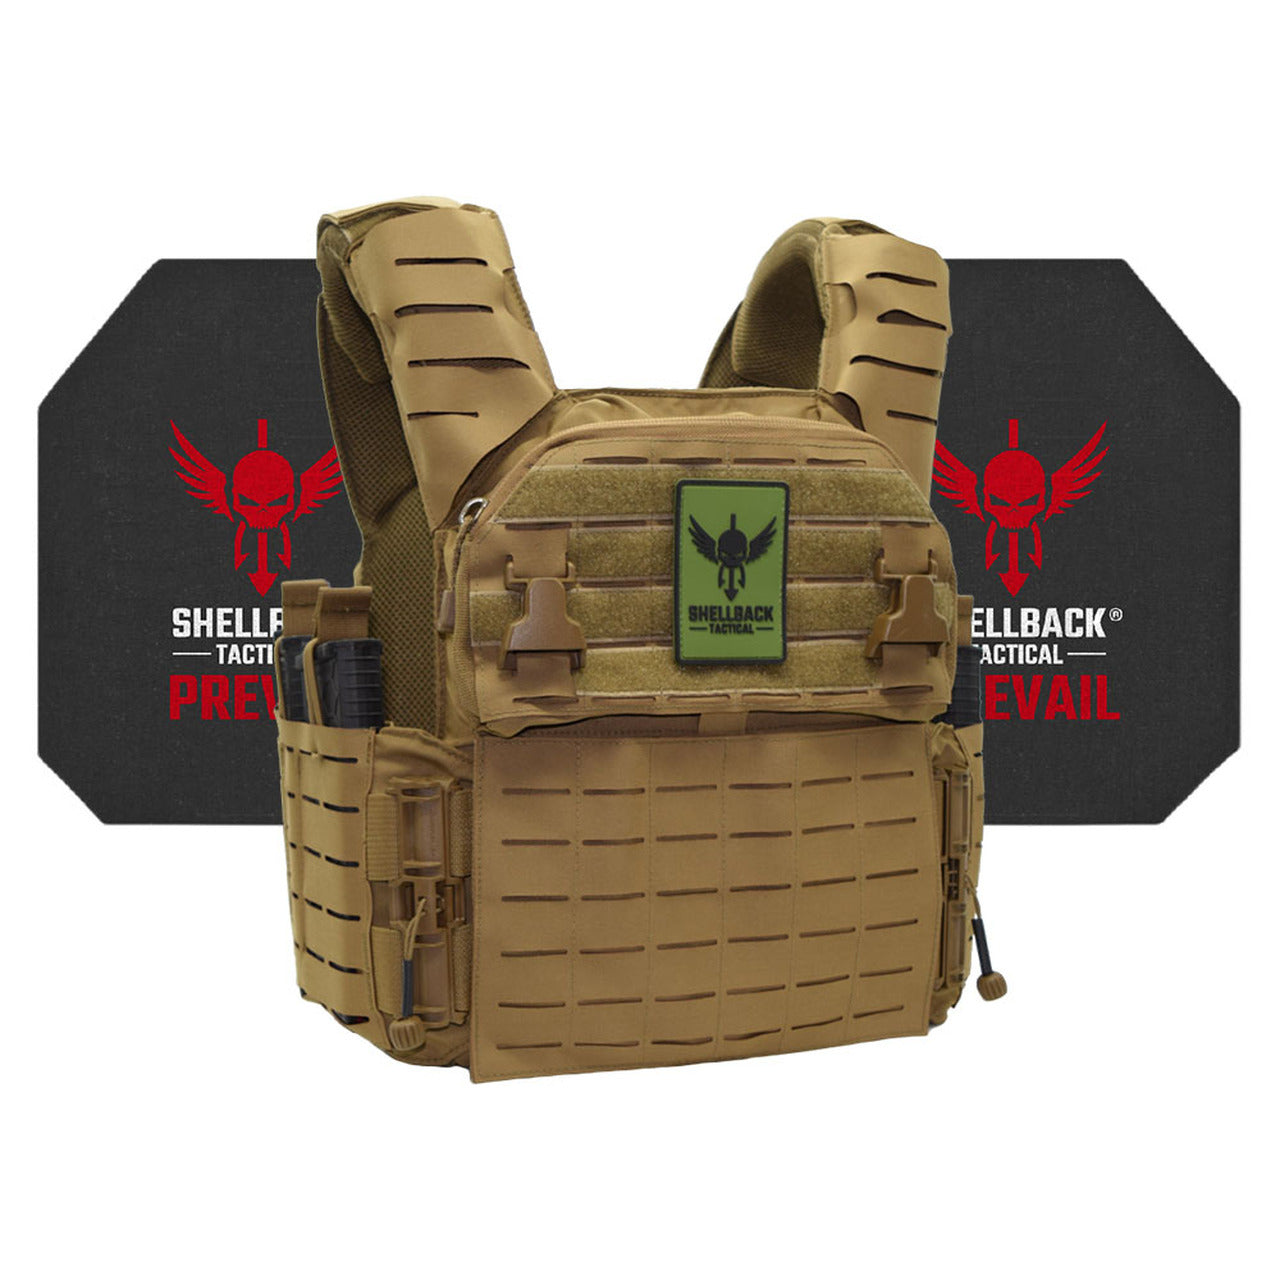 A Banshee Elite 3.0 Active Shooter Kit with Level IV Model 4S17 Armor Plates vest with the Shellback Tactical logo on it.